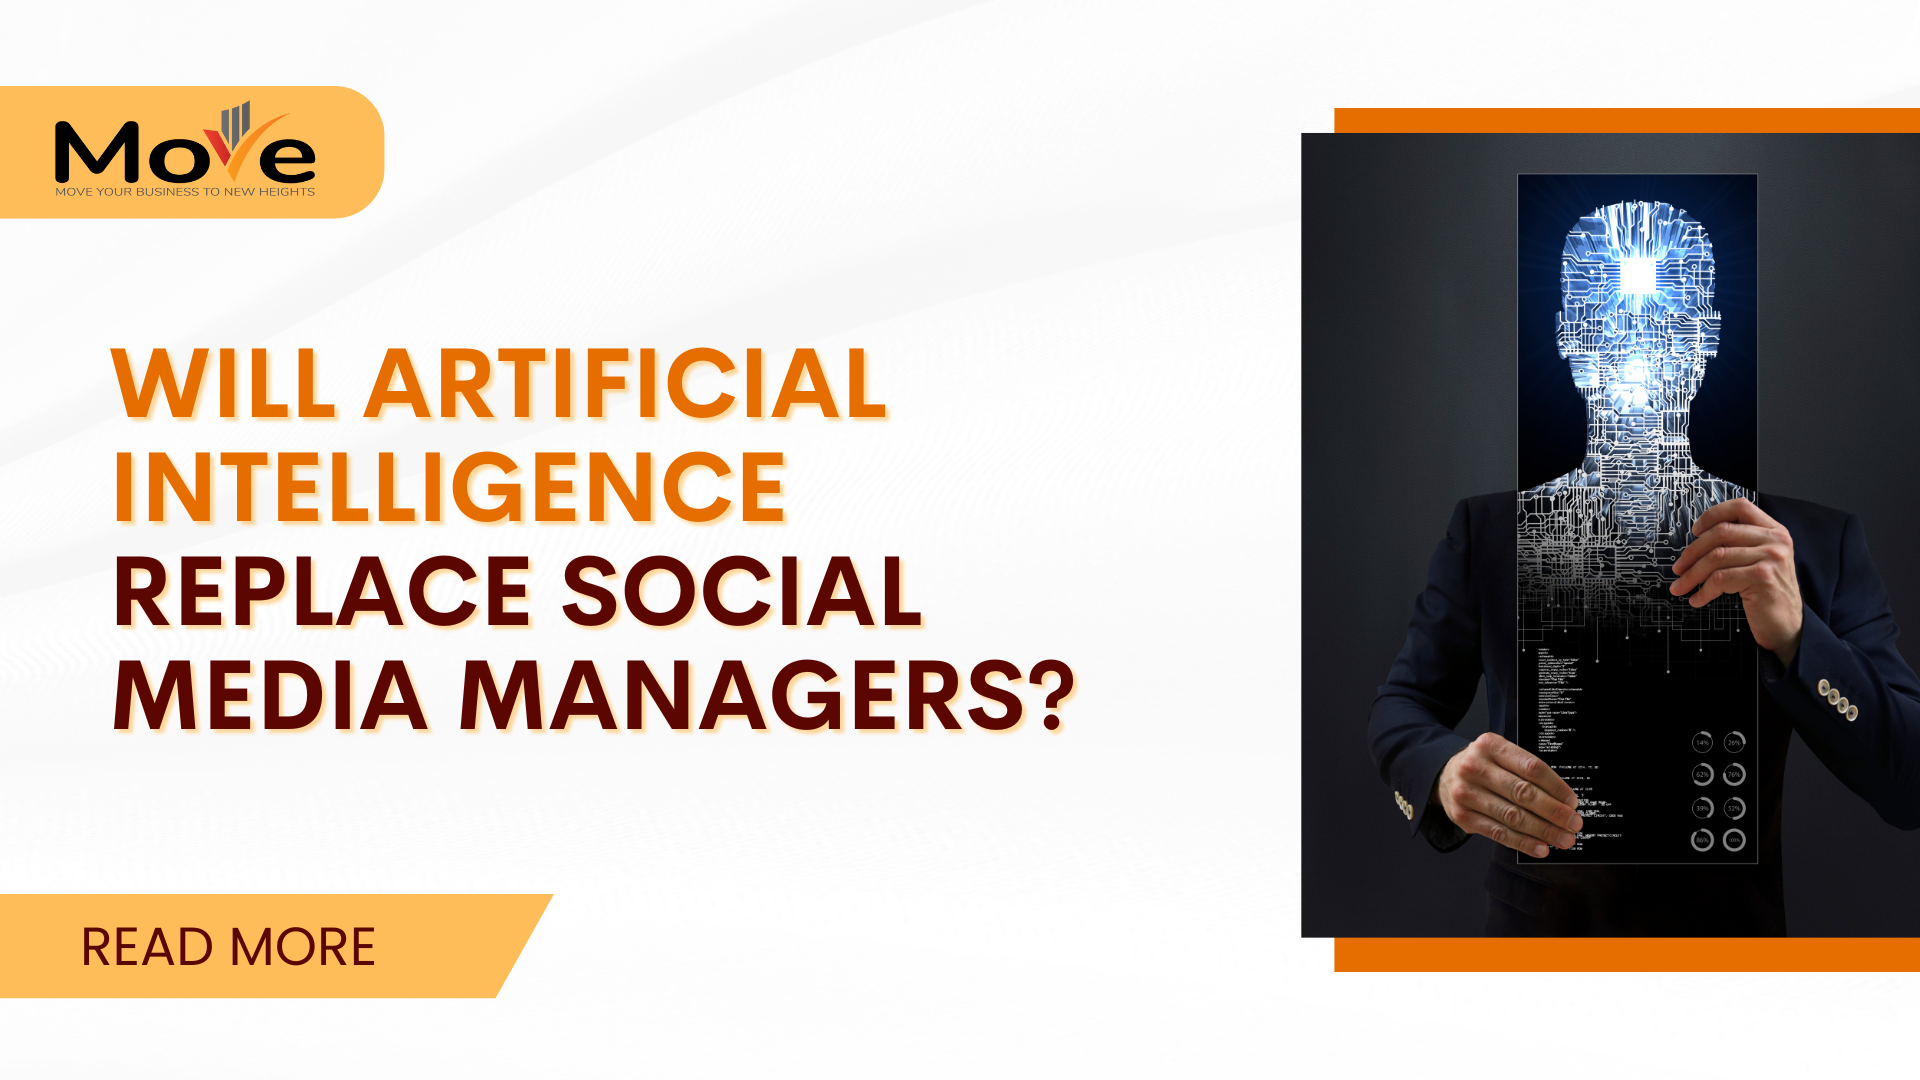 Will Artificial Intelligence Replace Social Media Managers?